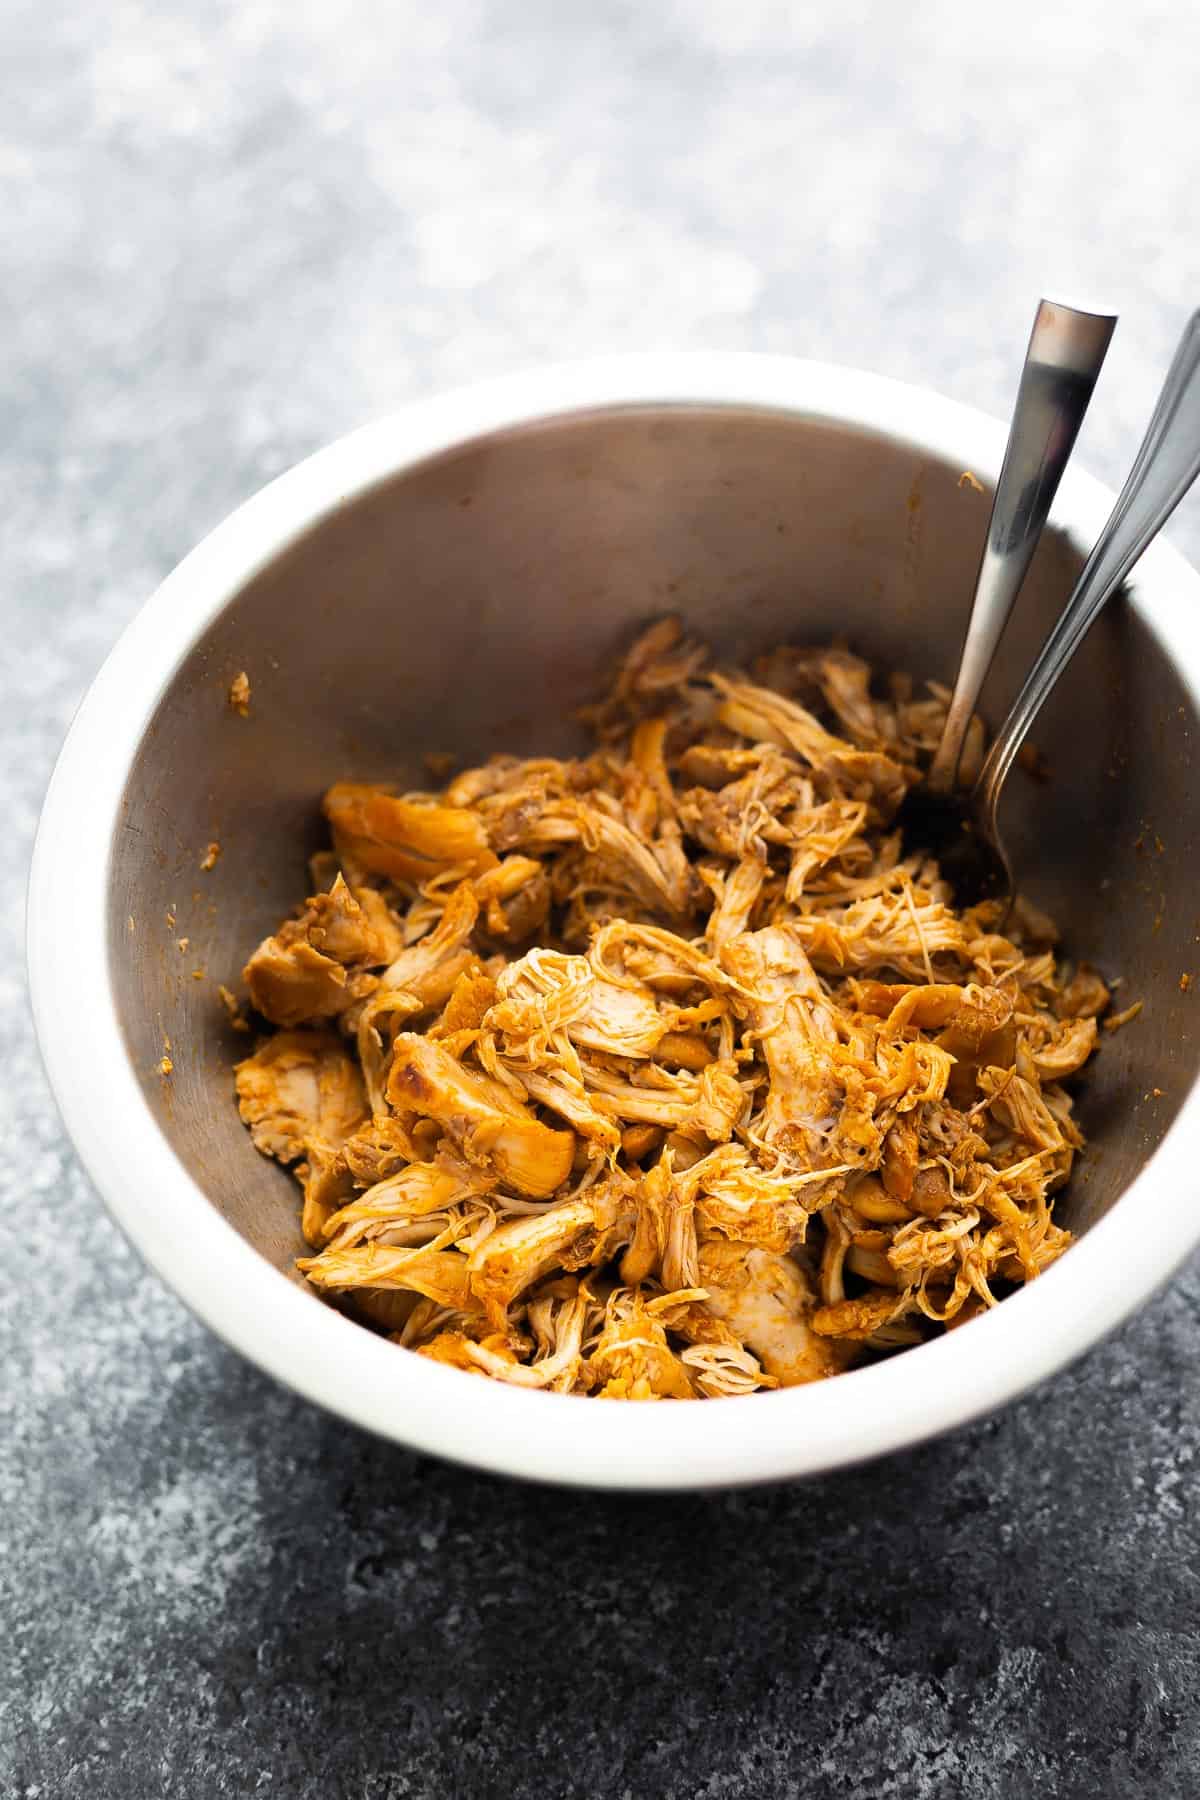 shredded chicken in bowl with forks